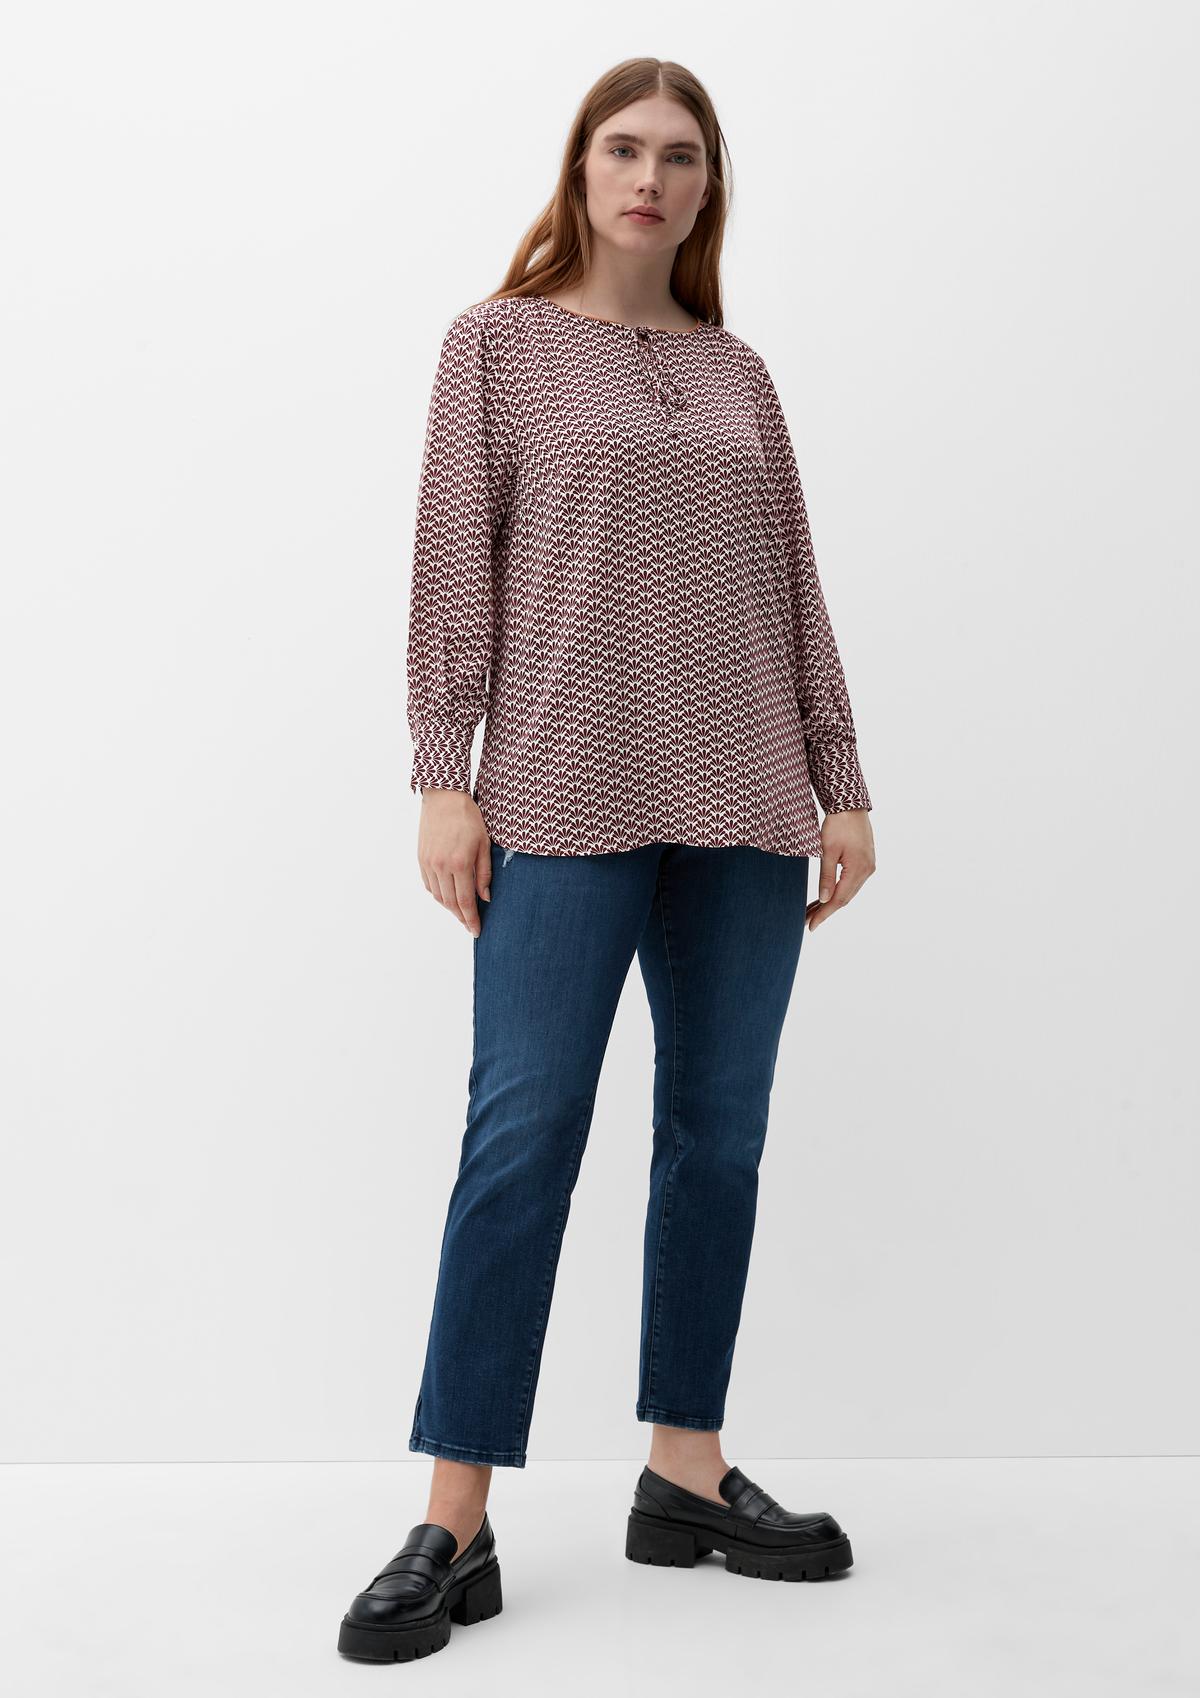 s.Oliver Bluse mit Allover-Muster